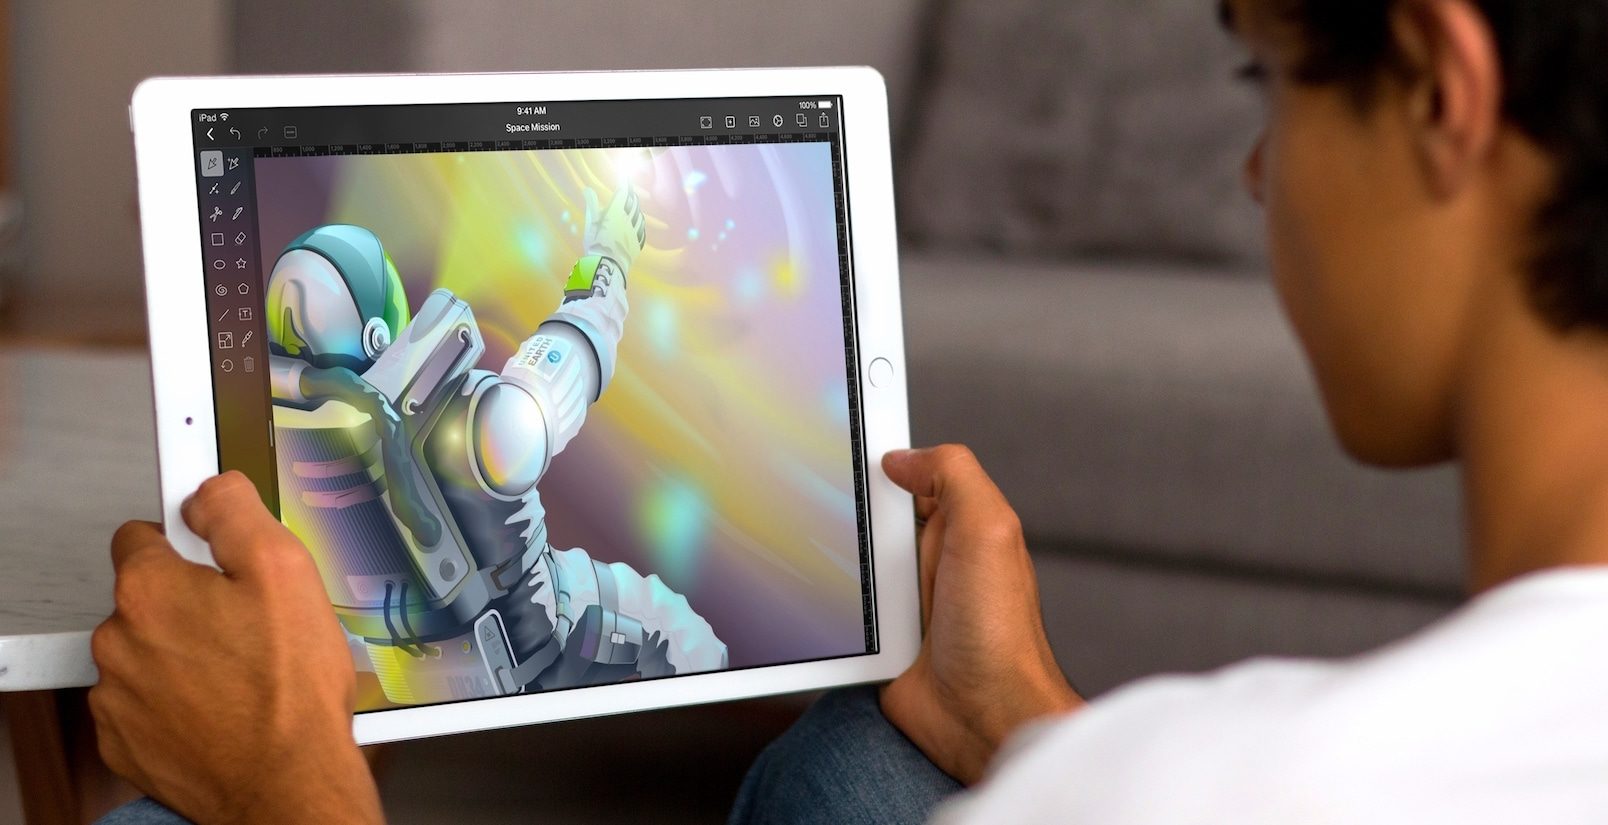 Vectornator Pro is the newest app for creating vector graphics on iPads and iPhones